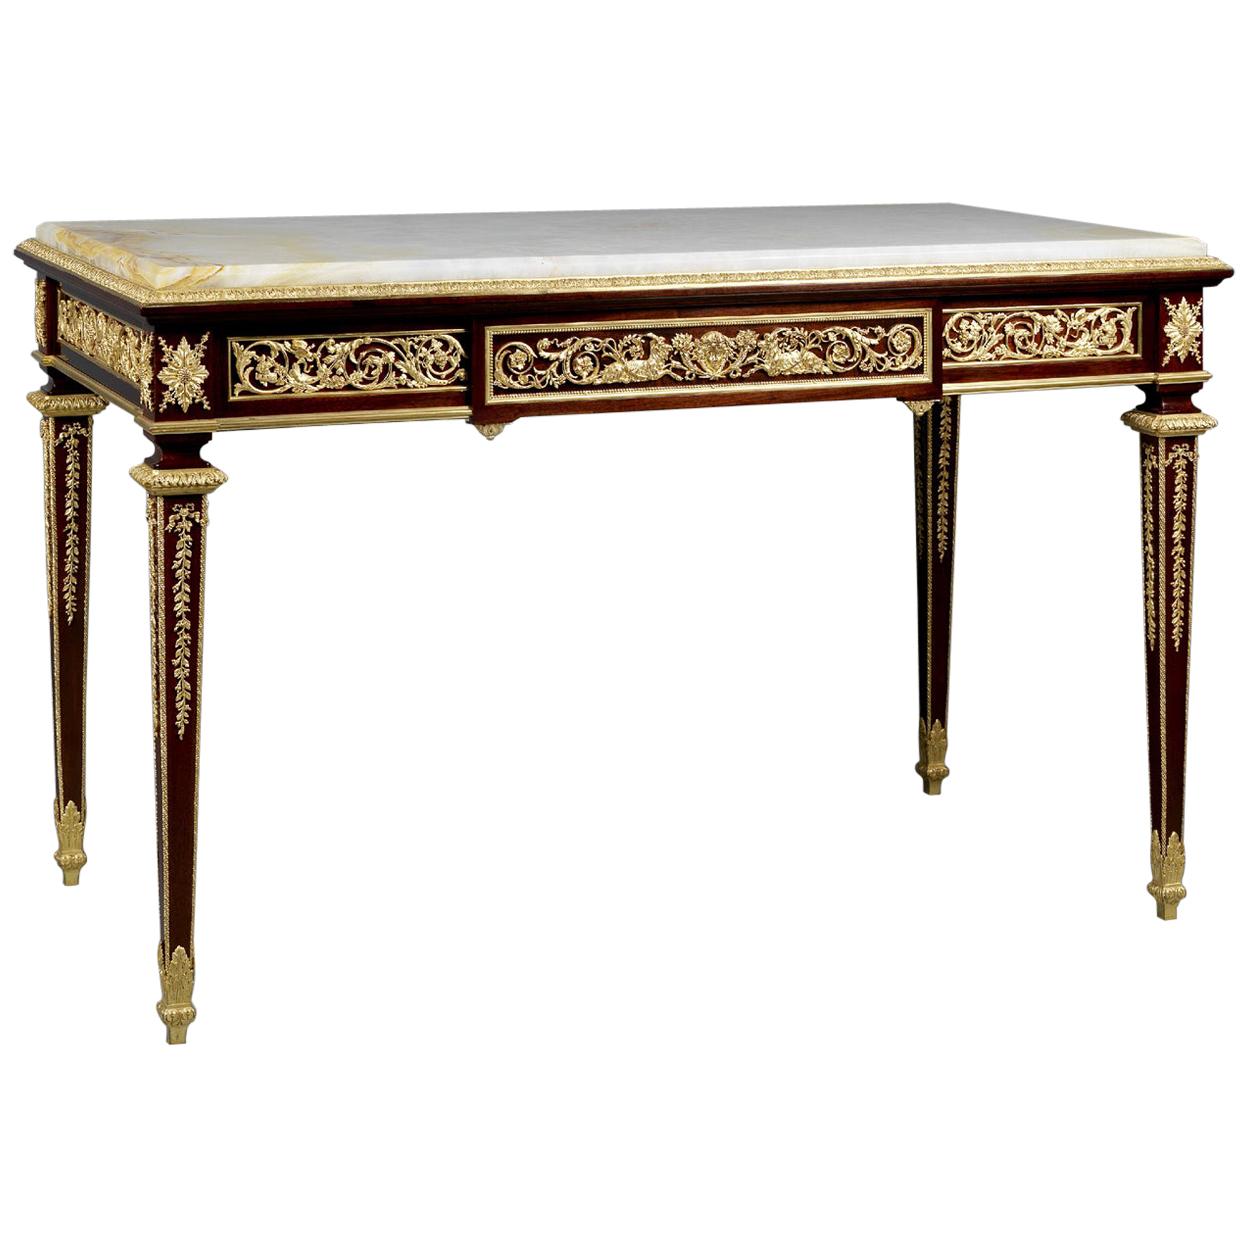 Mahogany Centre Table with an Onyx Marble-Top by François Linke, French